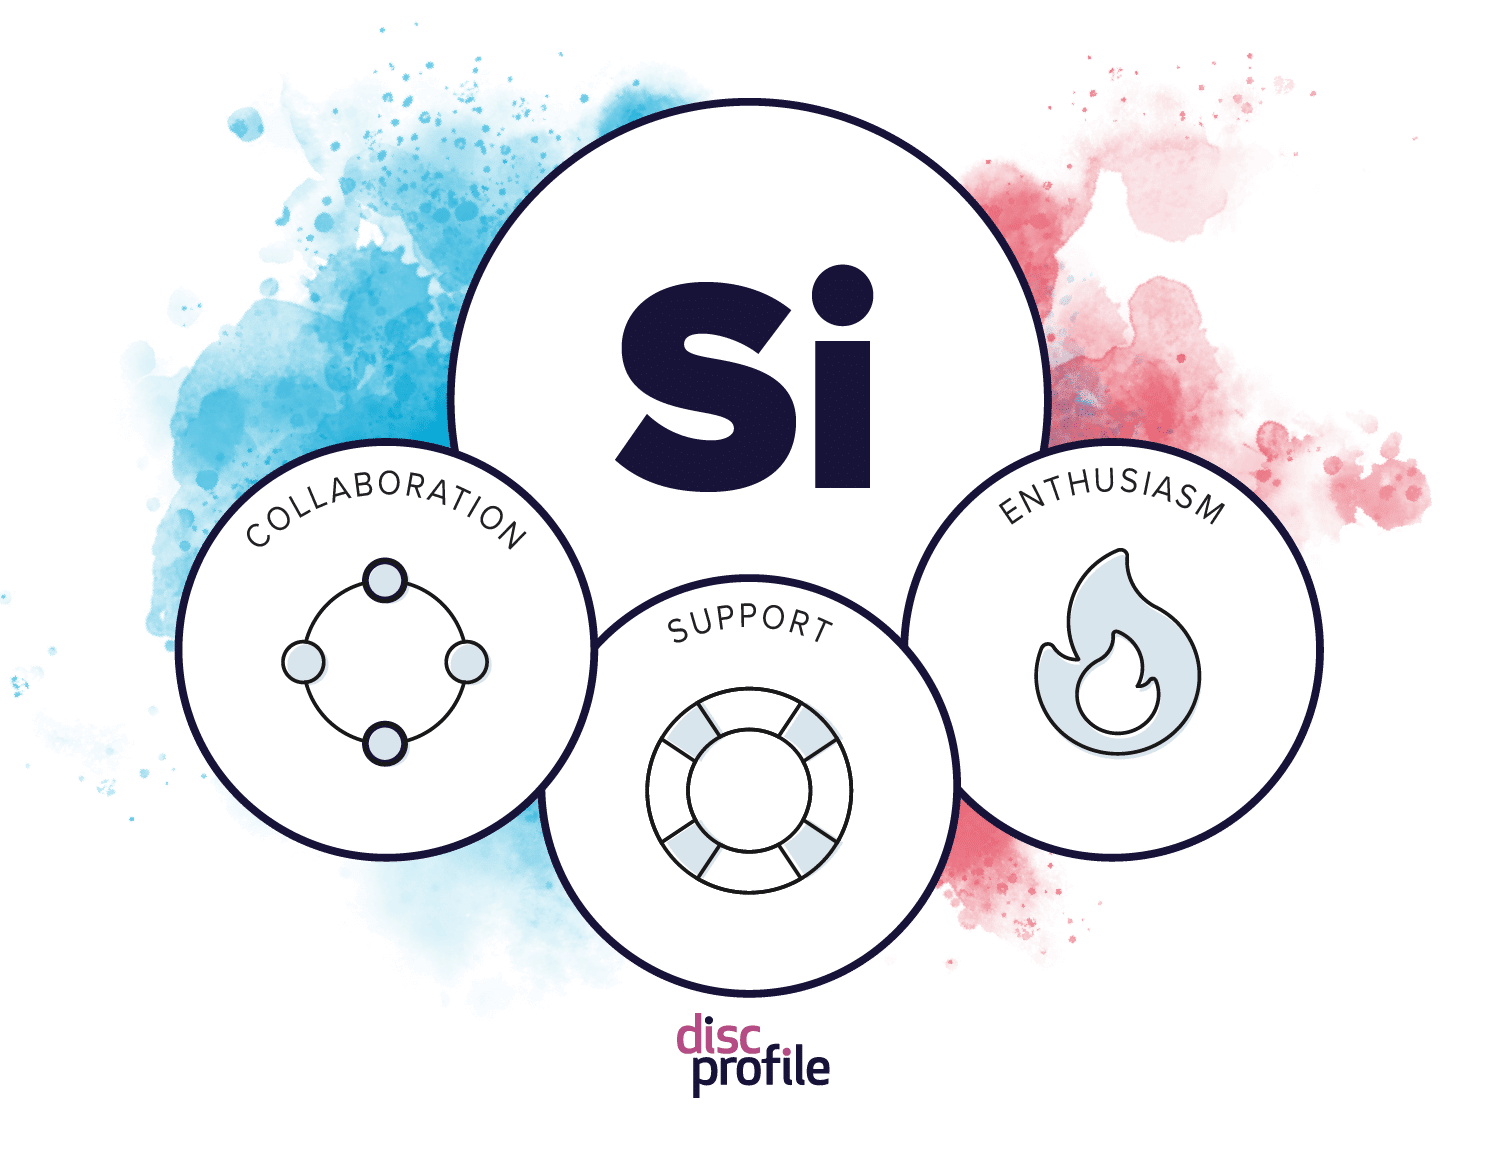 Si style graphic with priorities: collaboration, support, enthusiasm